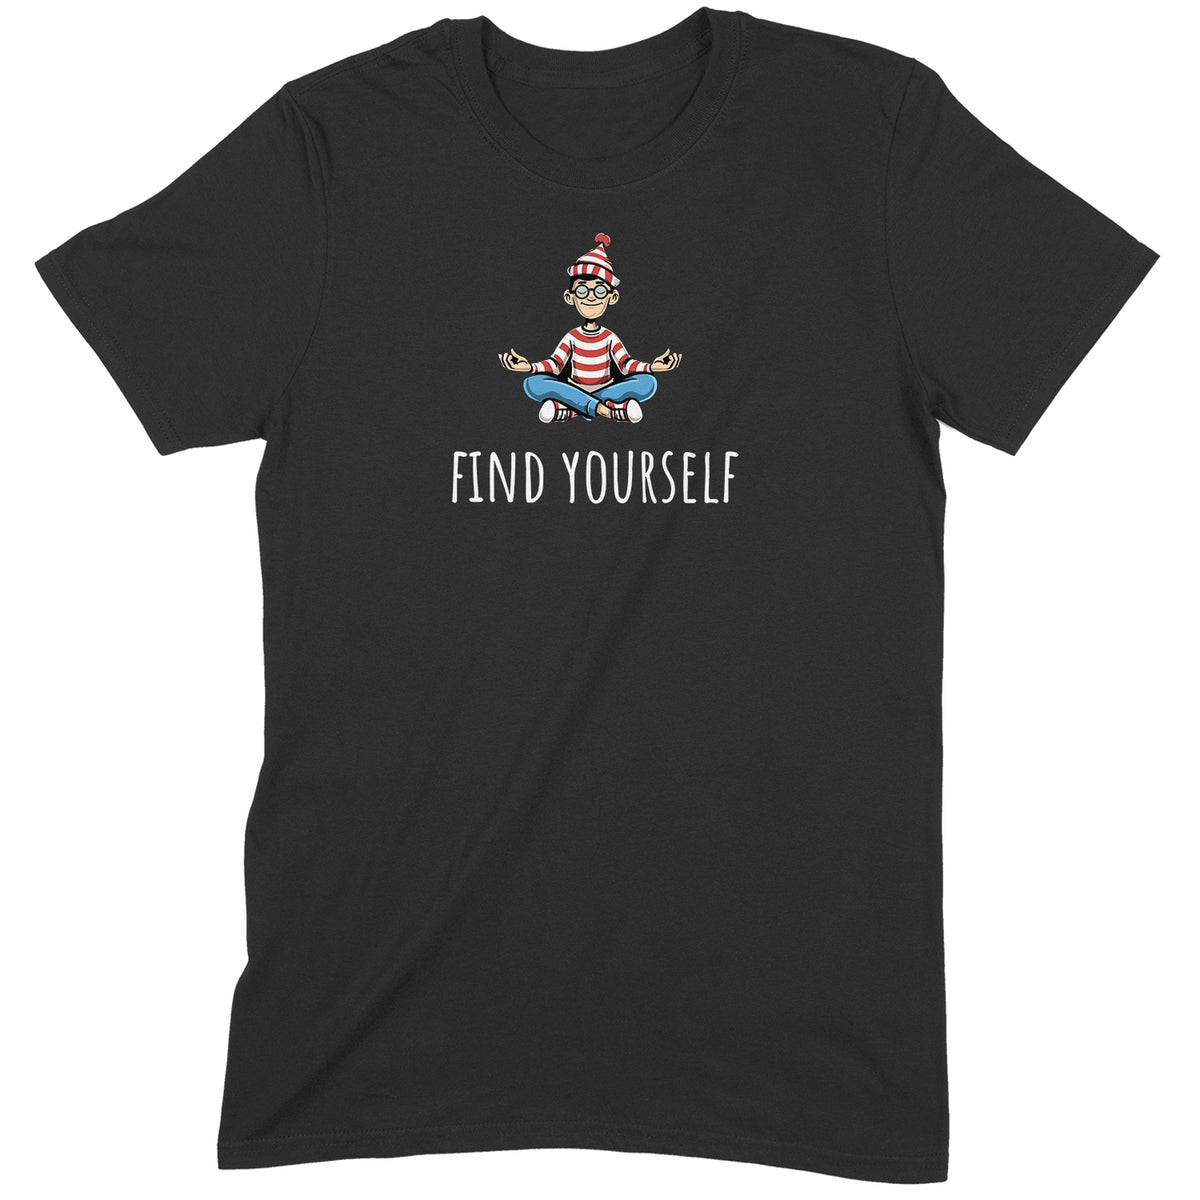 "Find Yourself" Premium Midweight Ringspun Cotton T-Shirt - Mens/Womens Fits